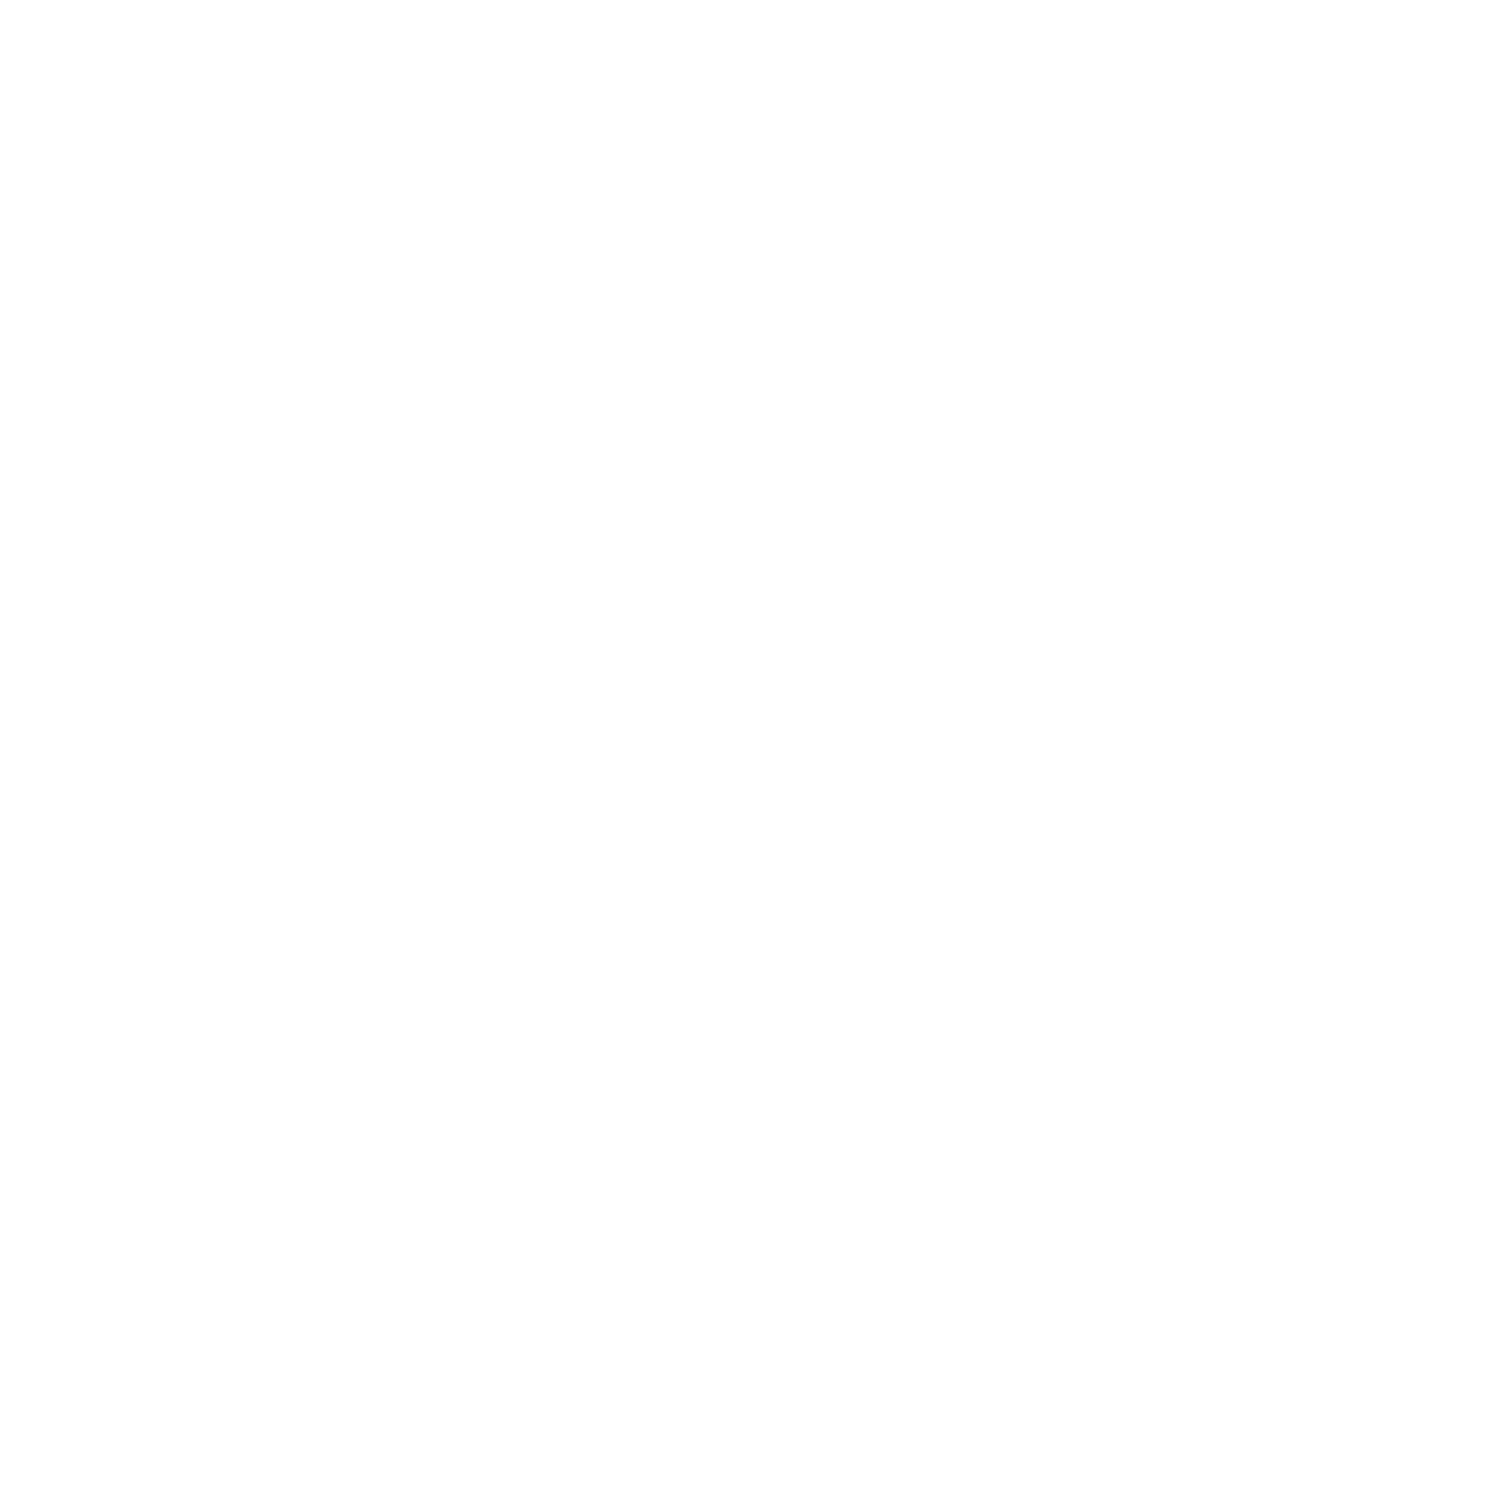 NEABOR_logo_whtie.png